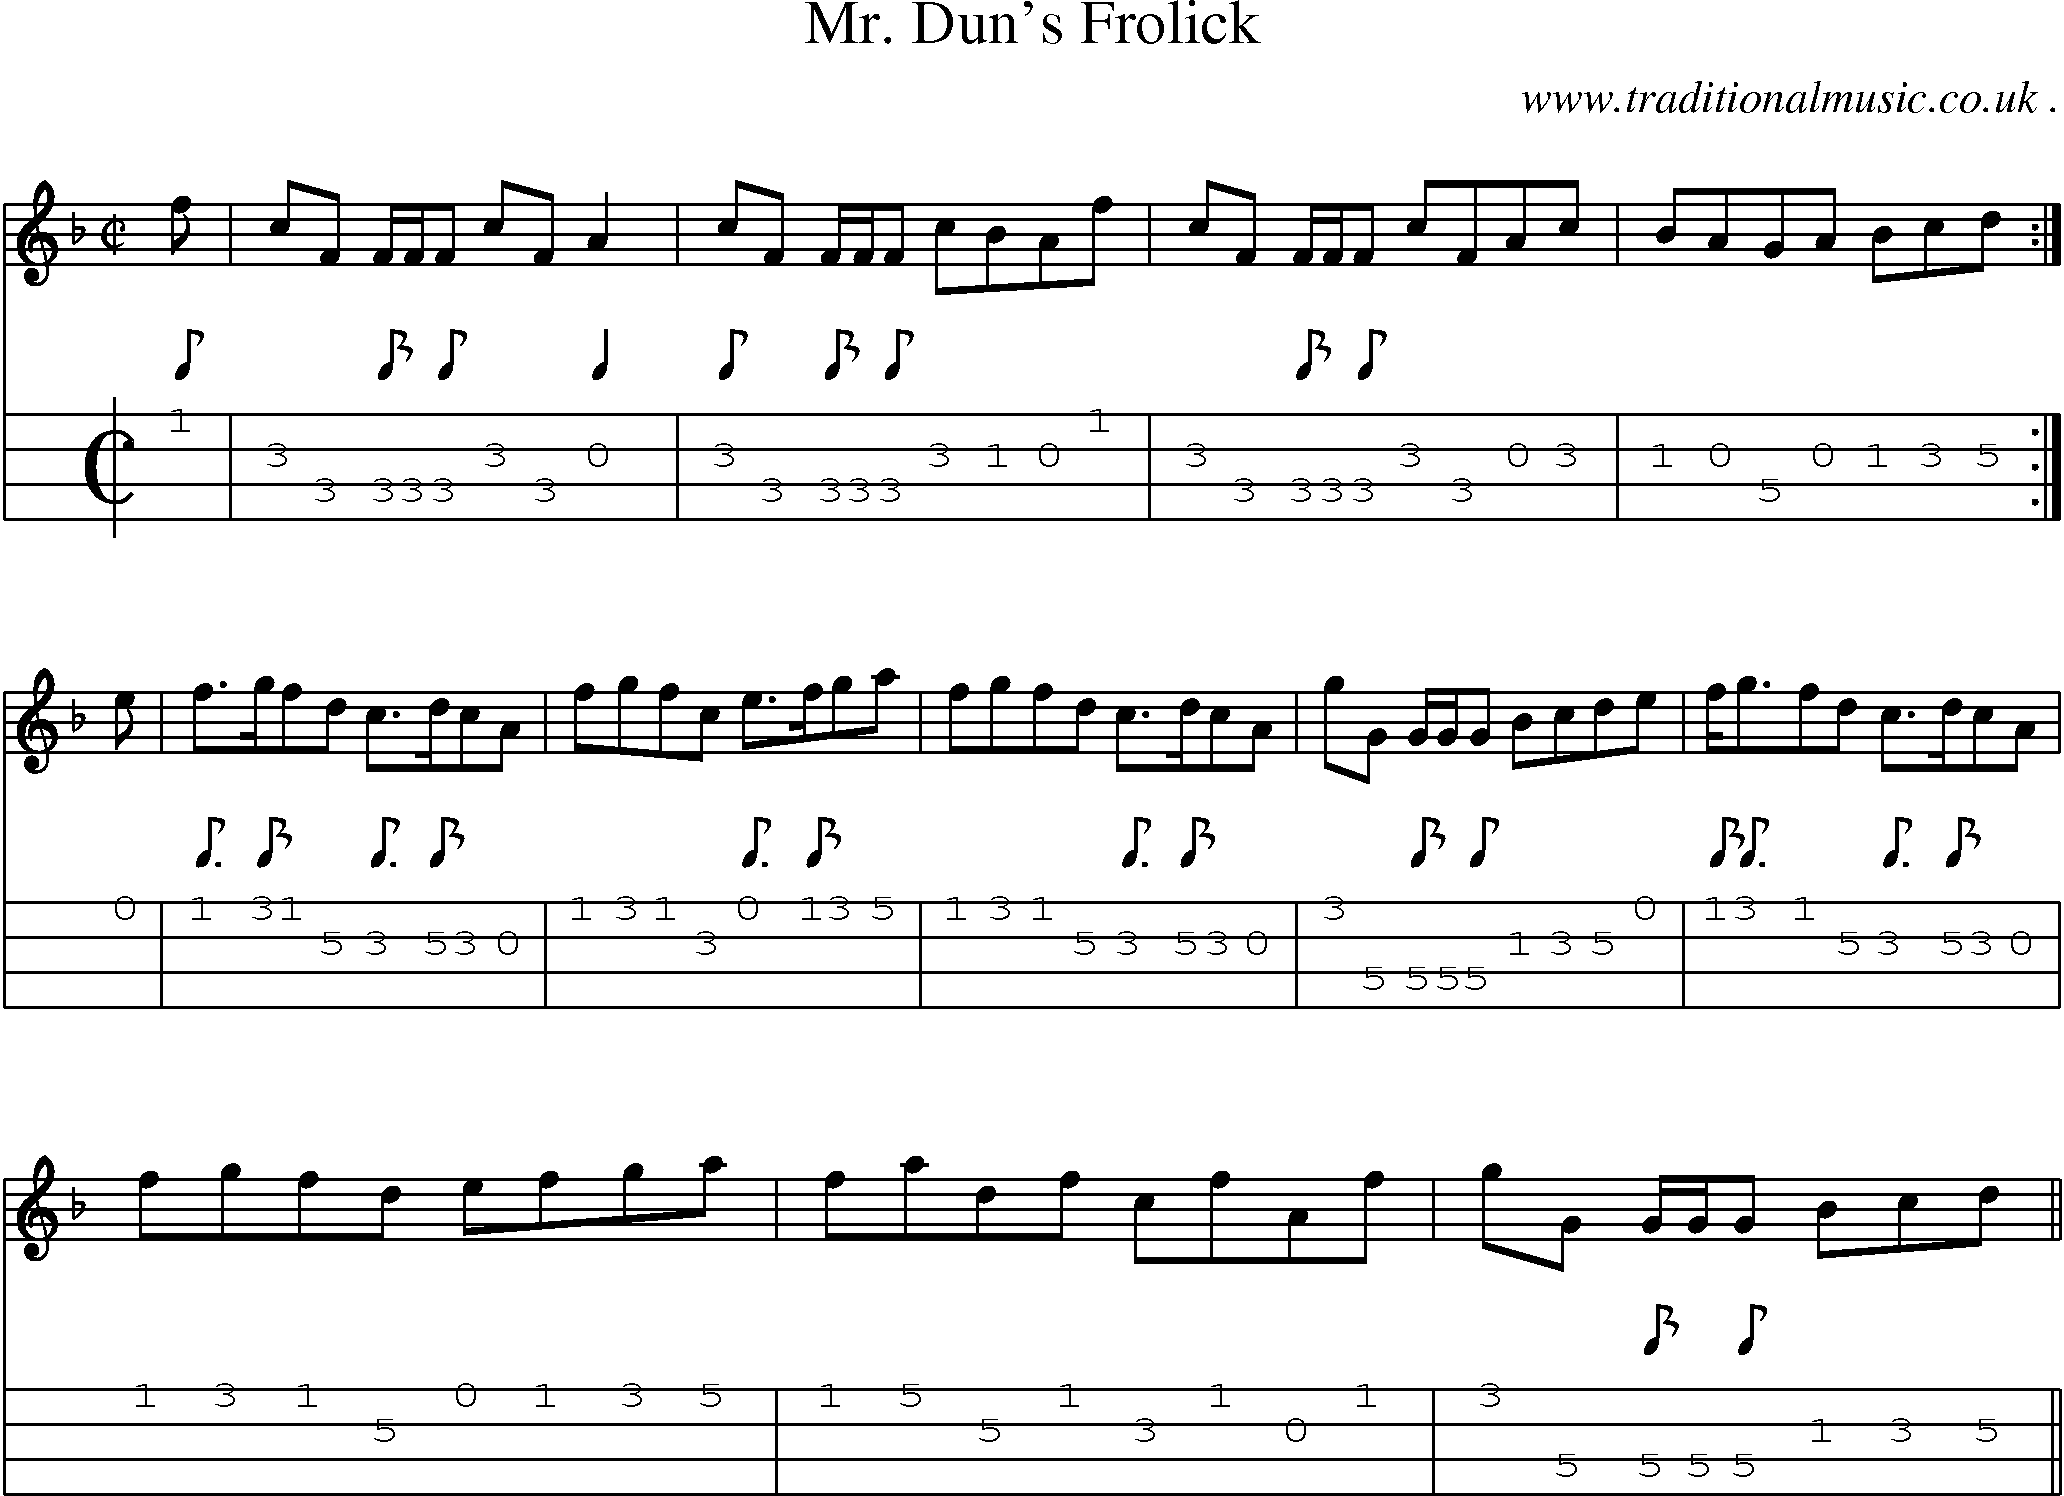 Sheet-music  score, Chords and Mandolin Tabs for Mr Duns Frolick